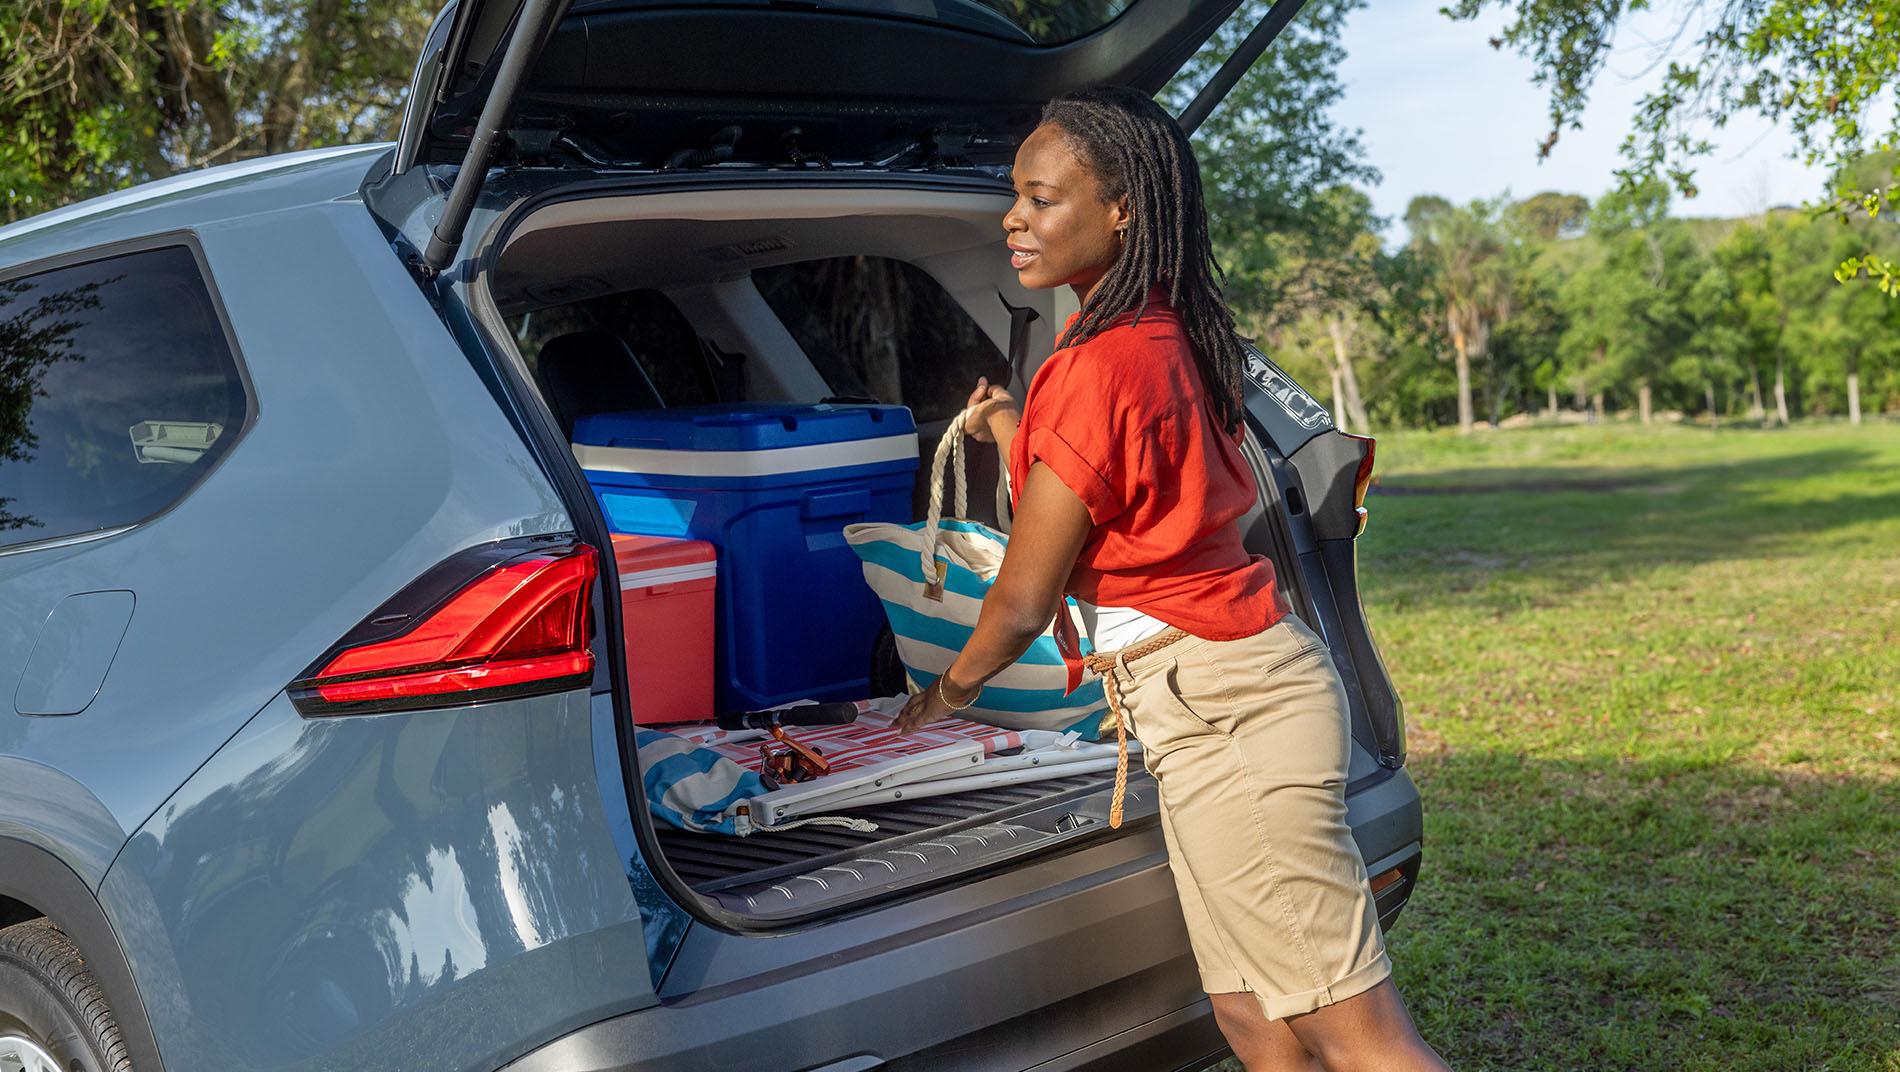 Toyota Hybrid SUV with a woman loading picnic items into the back - part of Toyota's Beyond Zero initiative